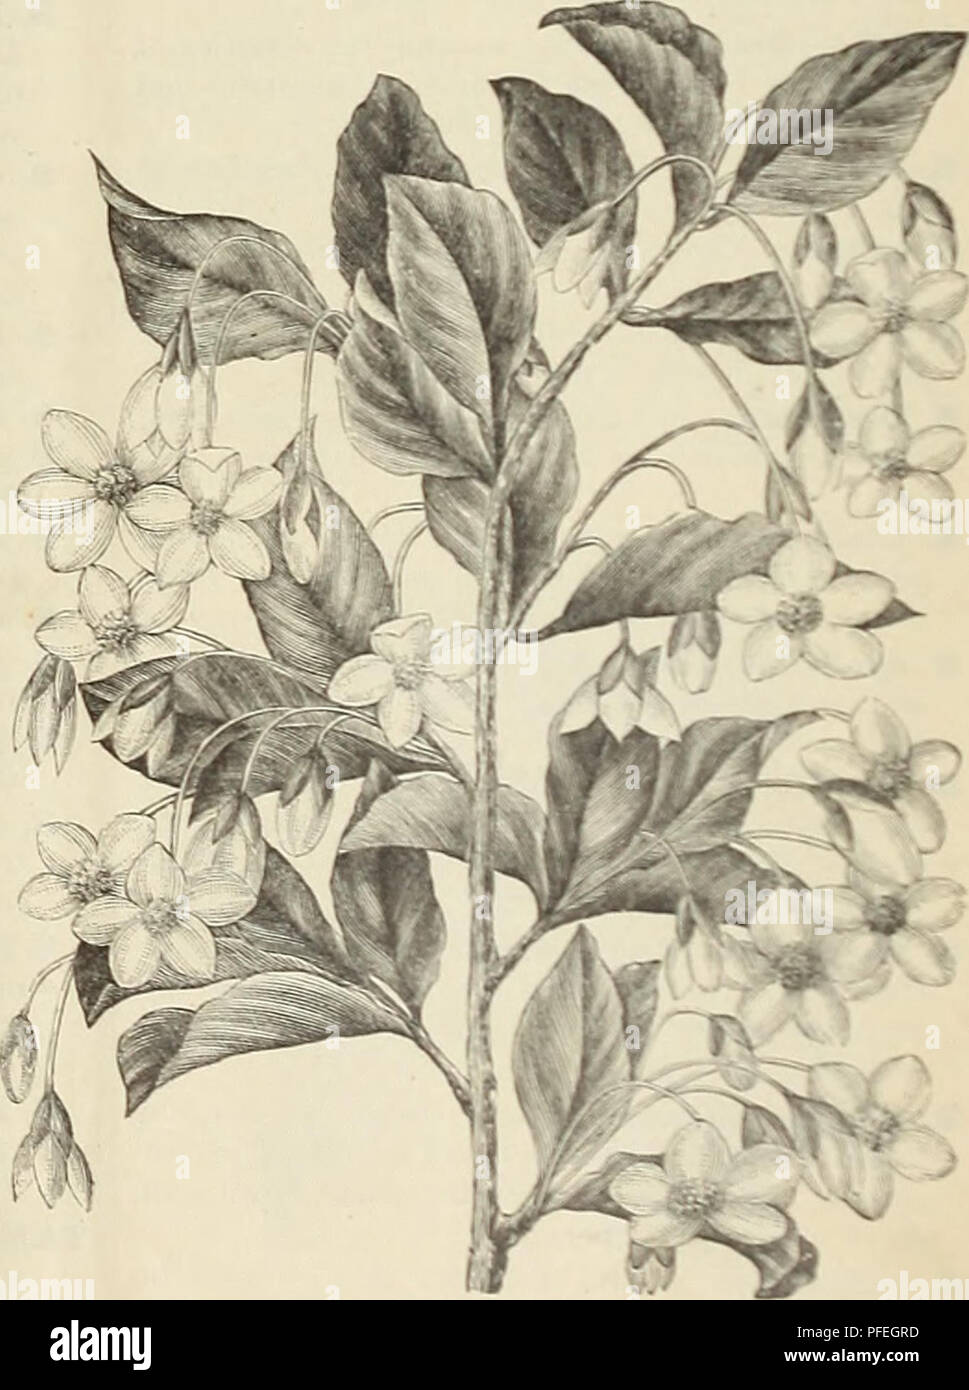 . Descriptive catalogue of ornamental trees, plants, vines, fruits, etc.. Nurseries (Horticulture) Pennsylvania Catalogs; Plants, Ornamental Catalogs; Trees Seedlings Catalogs; Flowers Seeds Catalogs. VIBURNUM PLICATUM. TAMAKIX parviflora (African Tamarisk^ The flowers are a blighter pink thau T. galUca: excel- lent for planting near the sea. 25 cts. VIBURNUM lantana (Wayfaring Tree). A large spreading bush, vritii massive foliage; flowers cream-white, in flat cymes. 25 cts. V. opulus (Cranberry Tree). The fruit of this bush is of very nearly the size, shape and color of the edible cranberry,  Stock Photo